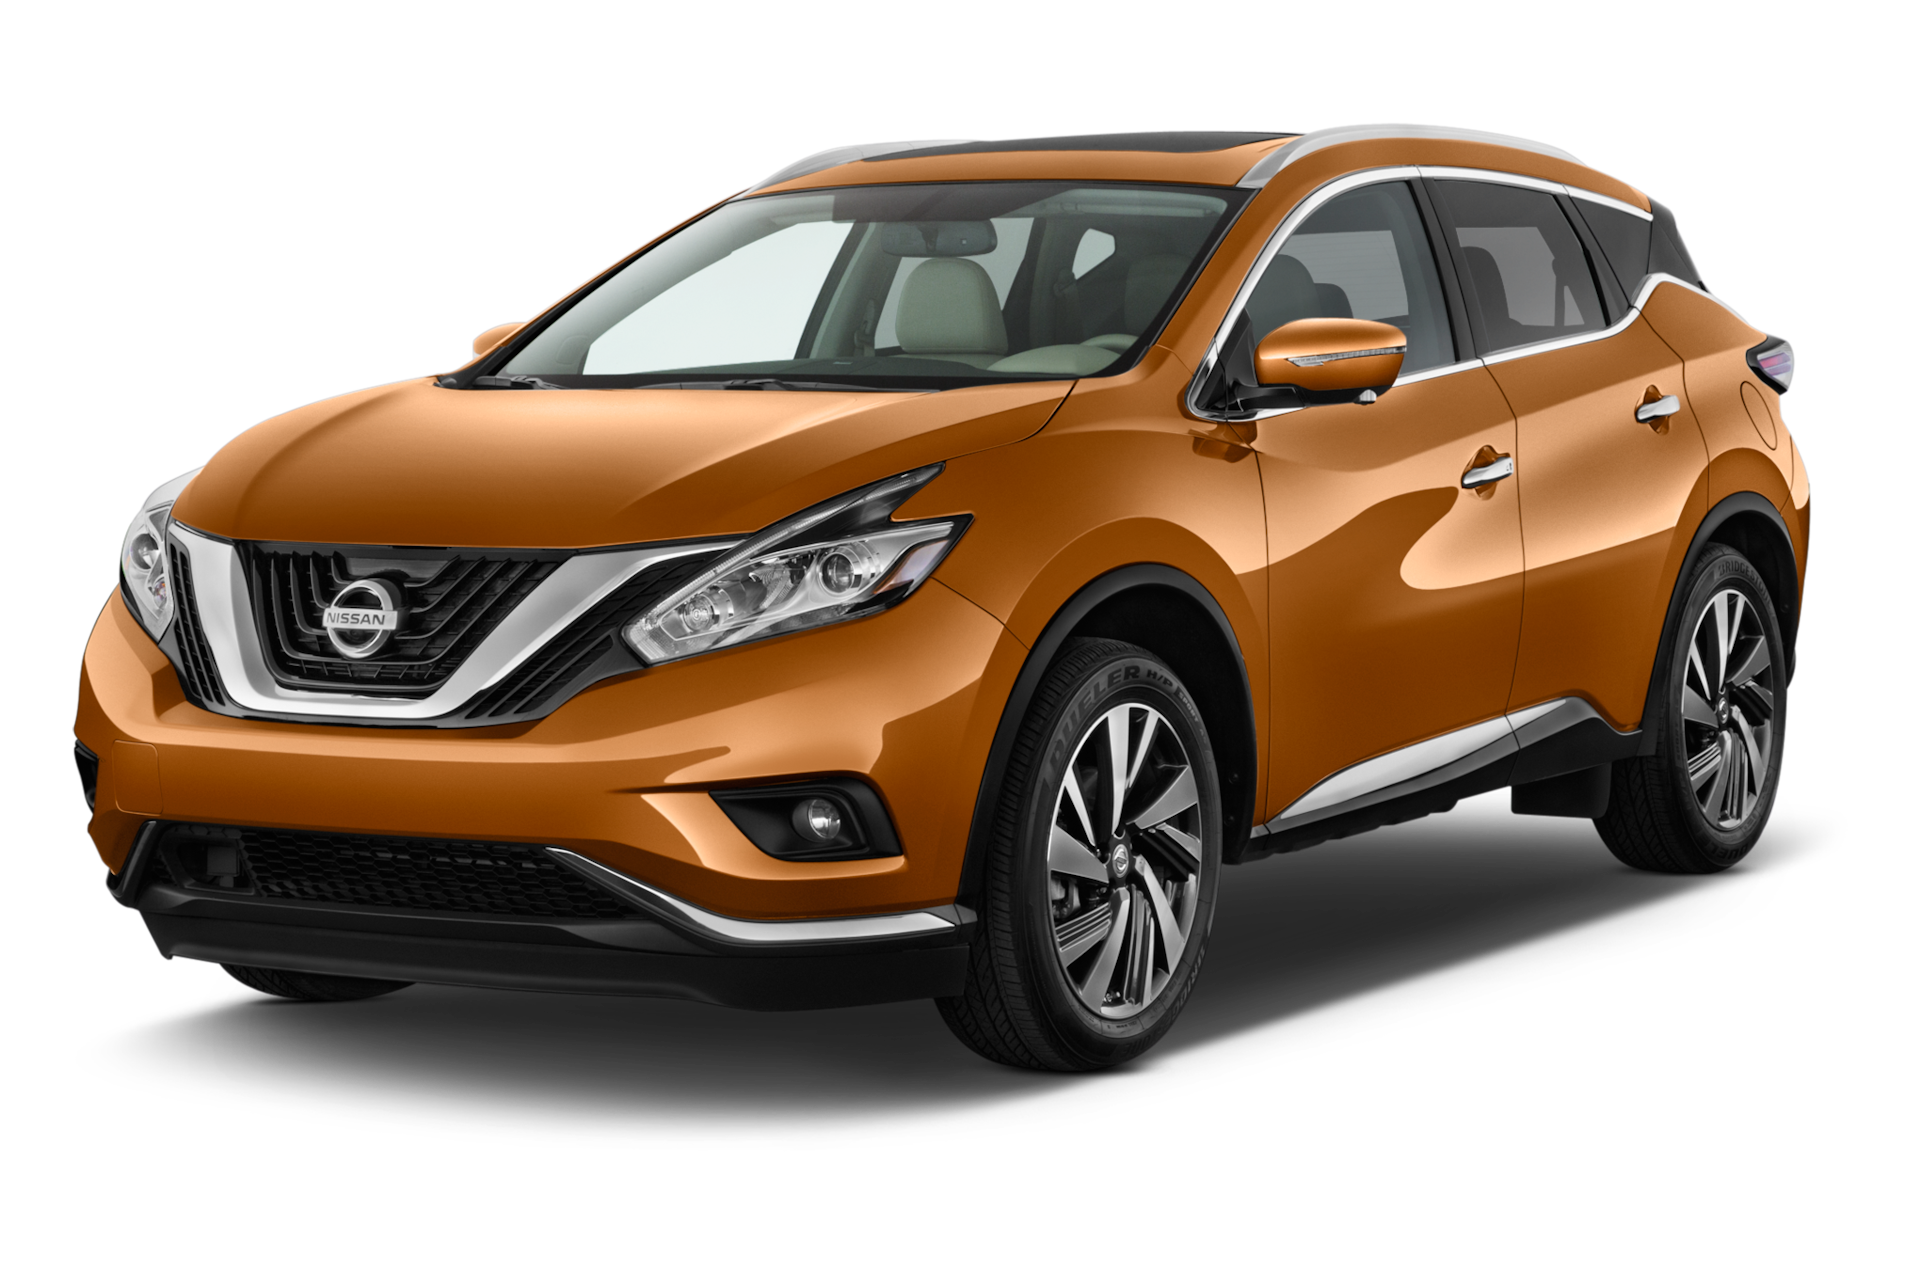 2015 Nissan Murano Prices, Reviews, and Photos - MotorTrend